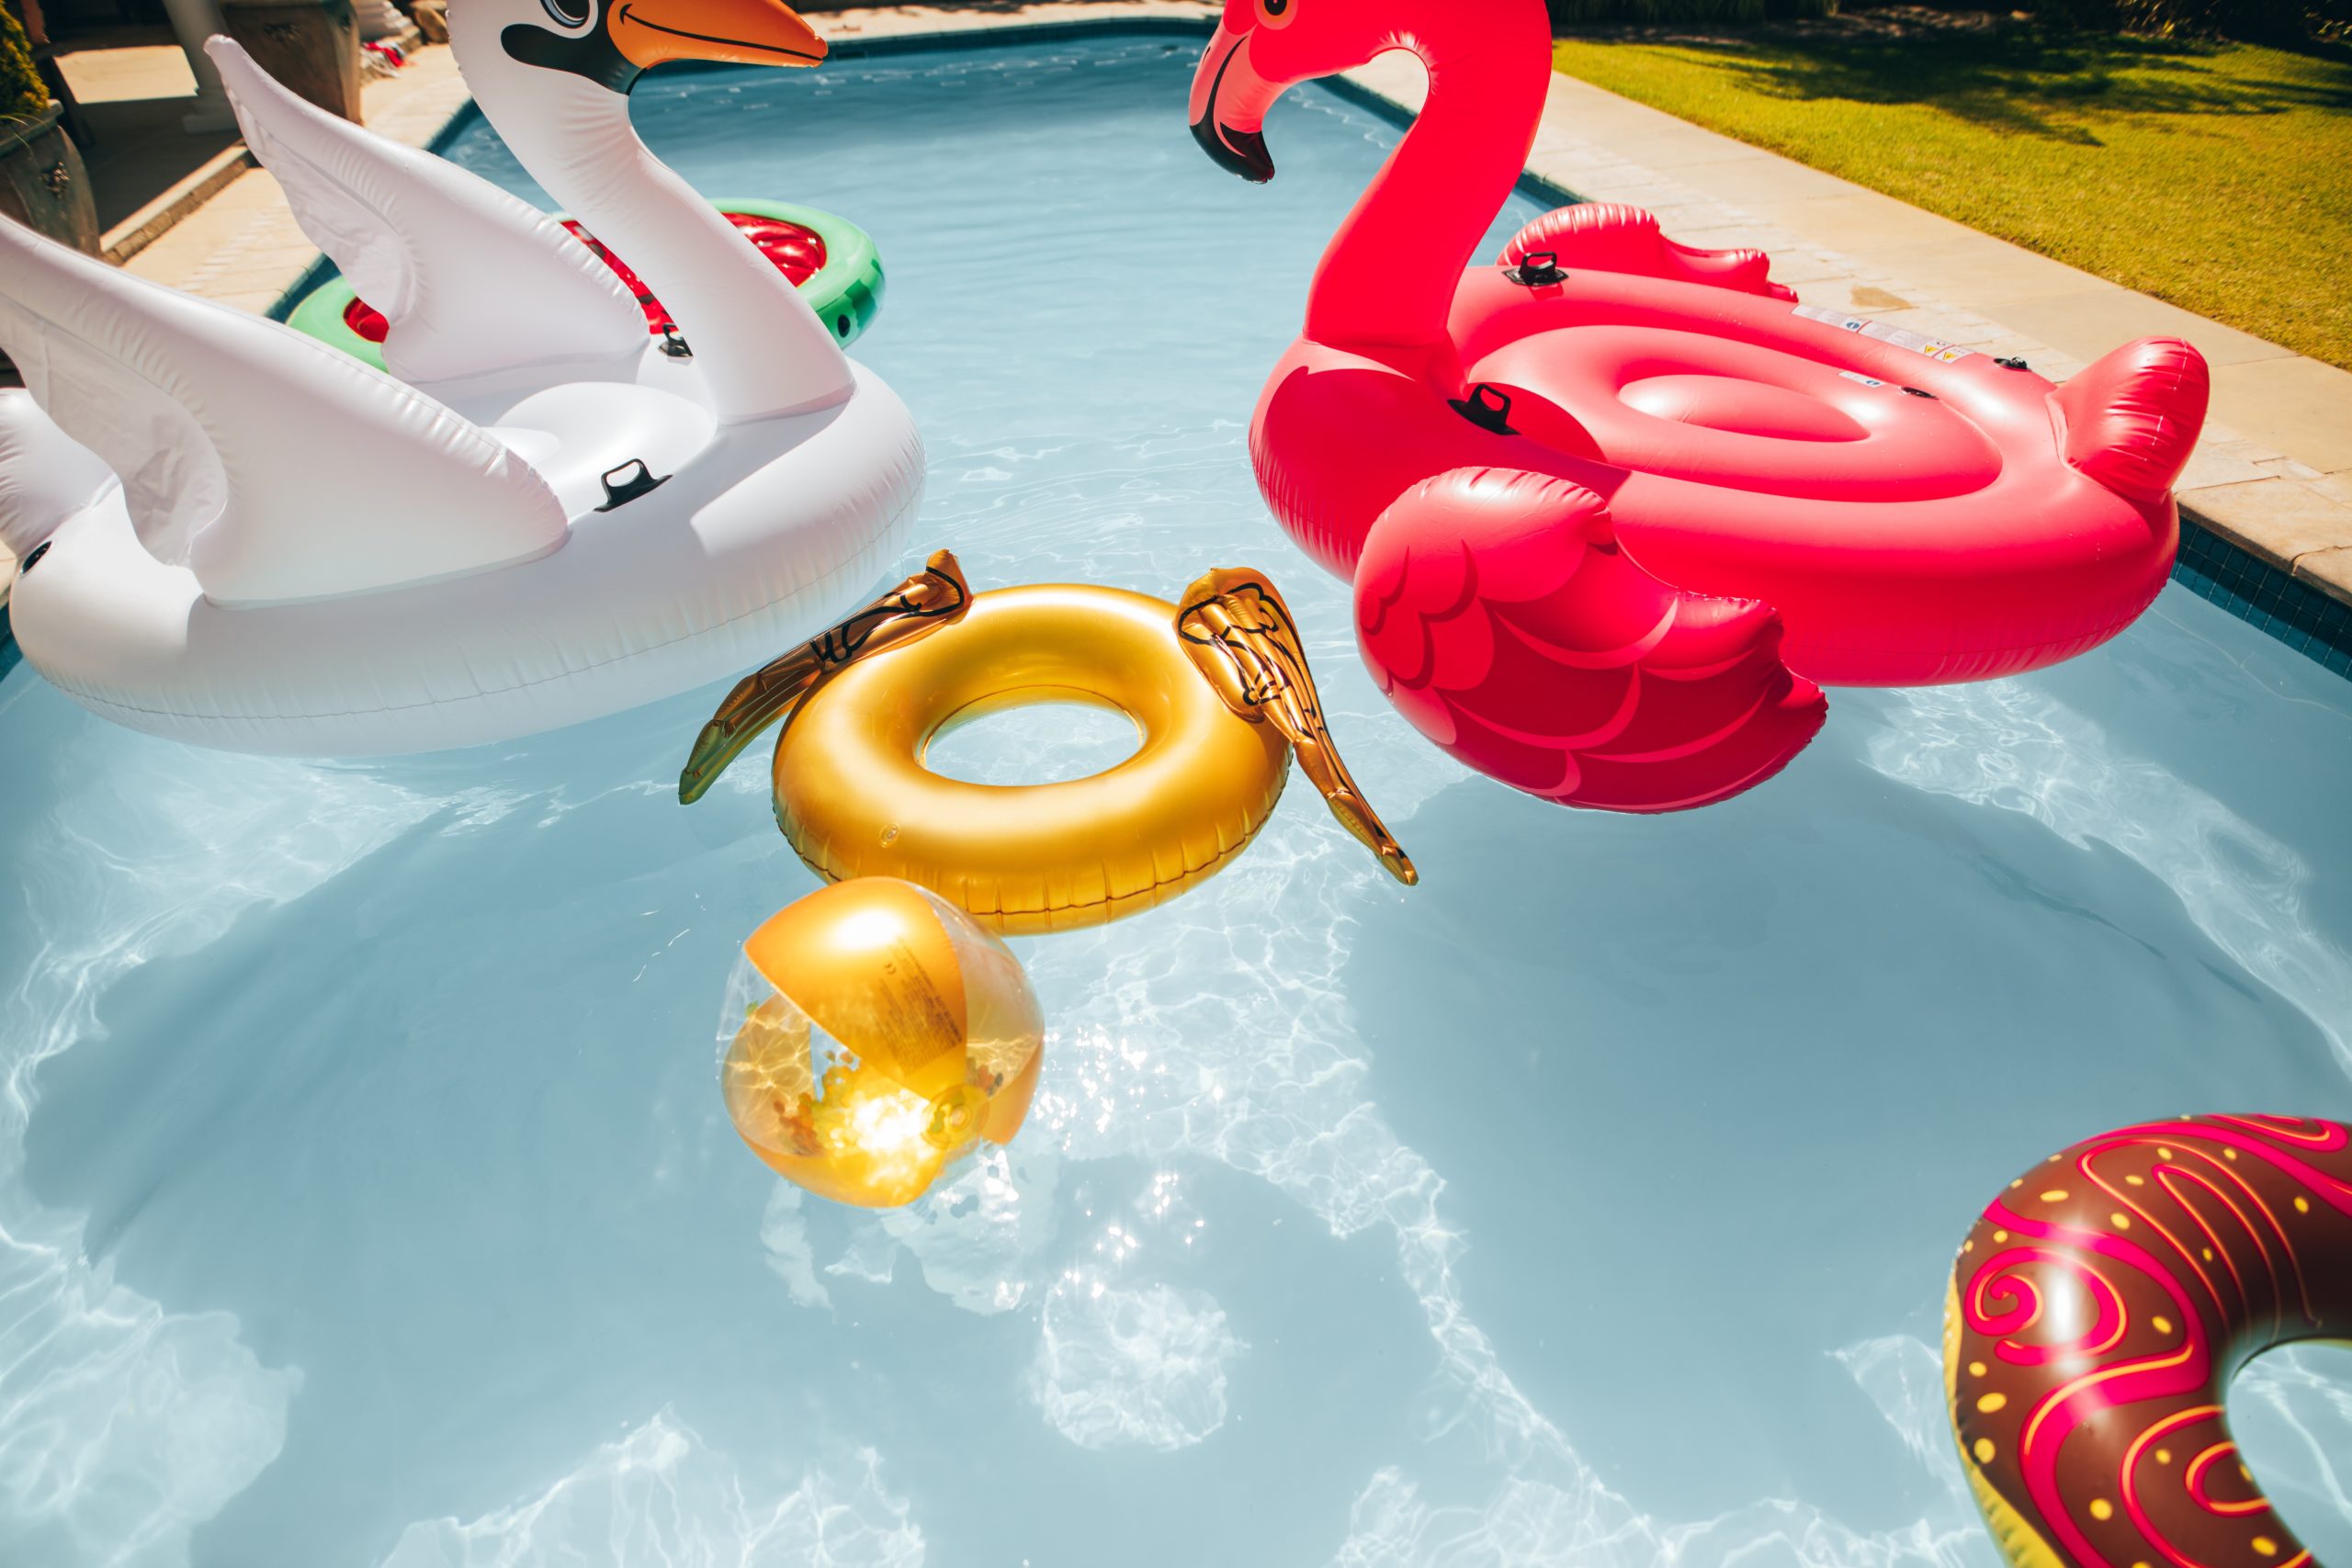 Group-of-colorful-inflatable-toys-floating-in-a-swimming-pool-on-a-summer-day.-Inflatable-swan-flamingo-ring-and-ball-in-pool-scaled